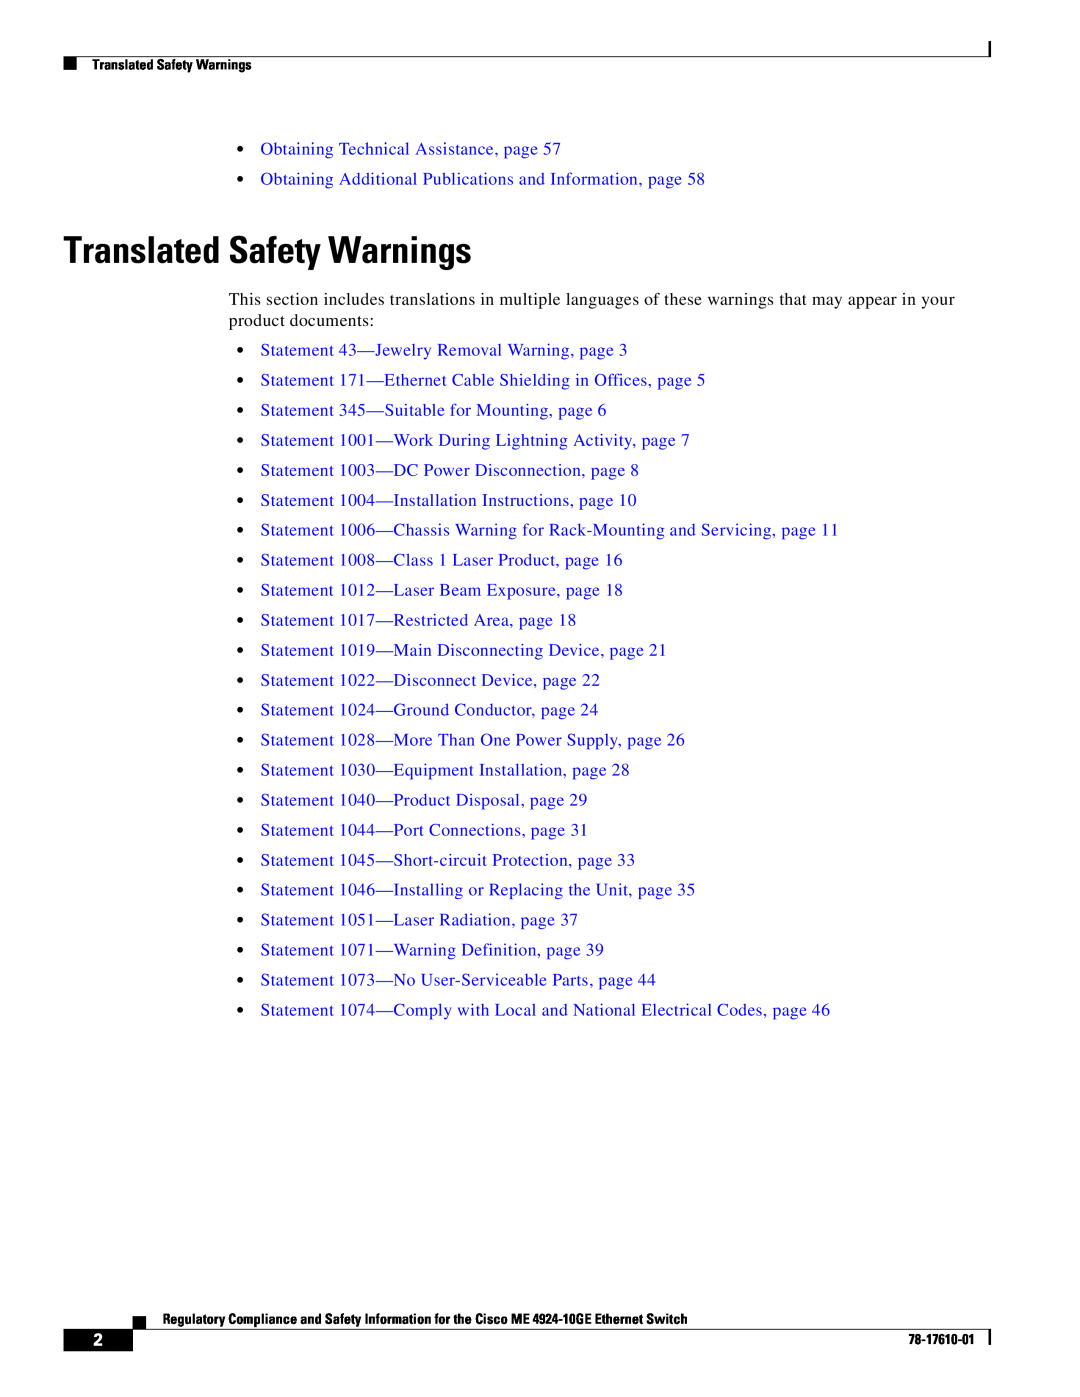 Cisco Systems ME 4924-10GE important safety instructions Translated Safety Warnings, Obtaining Technical Assistance, page 